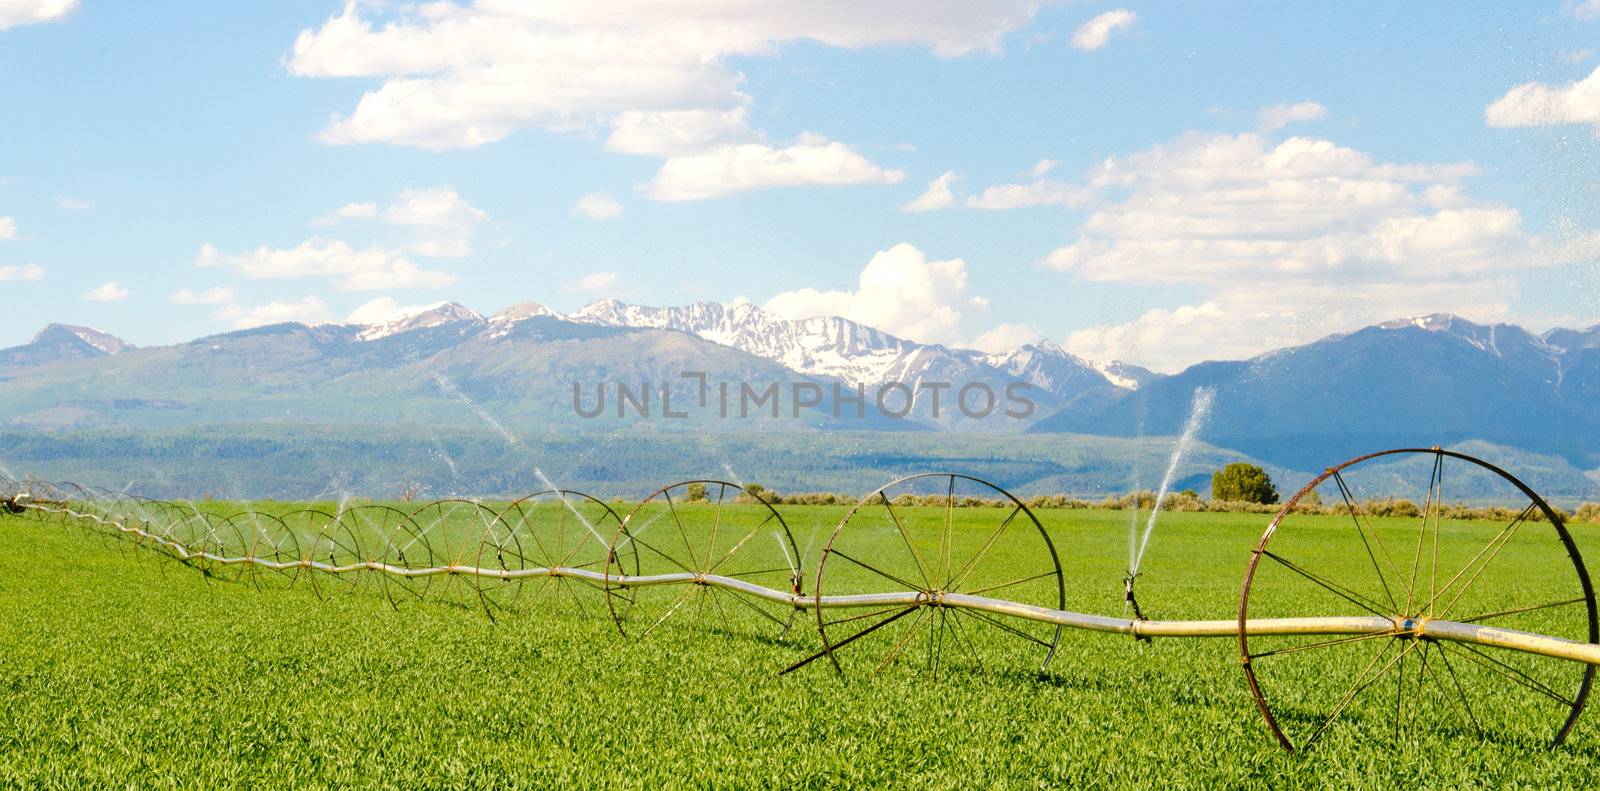 Irrigation System on Farm with San Juan Mountains in Background by robert.bohrer25@gmail.com